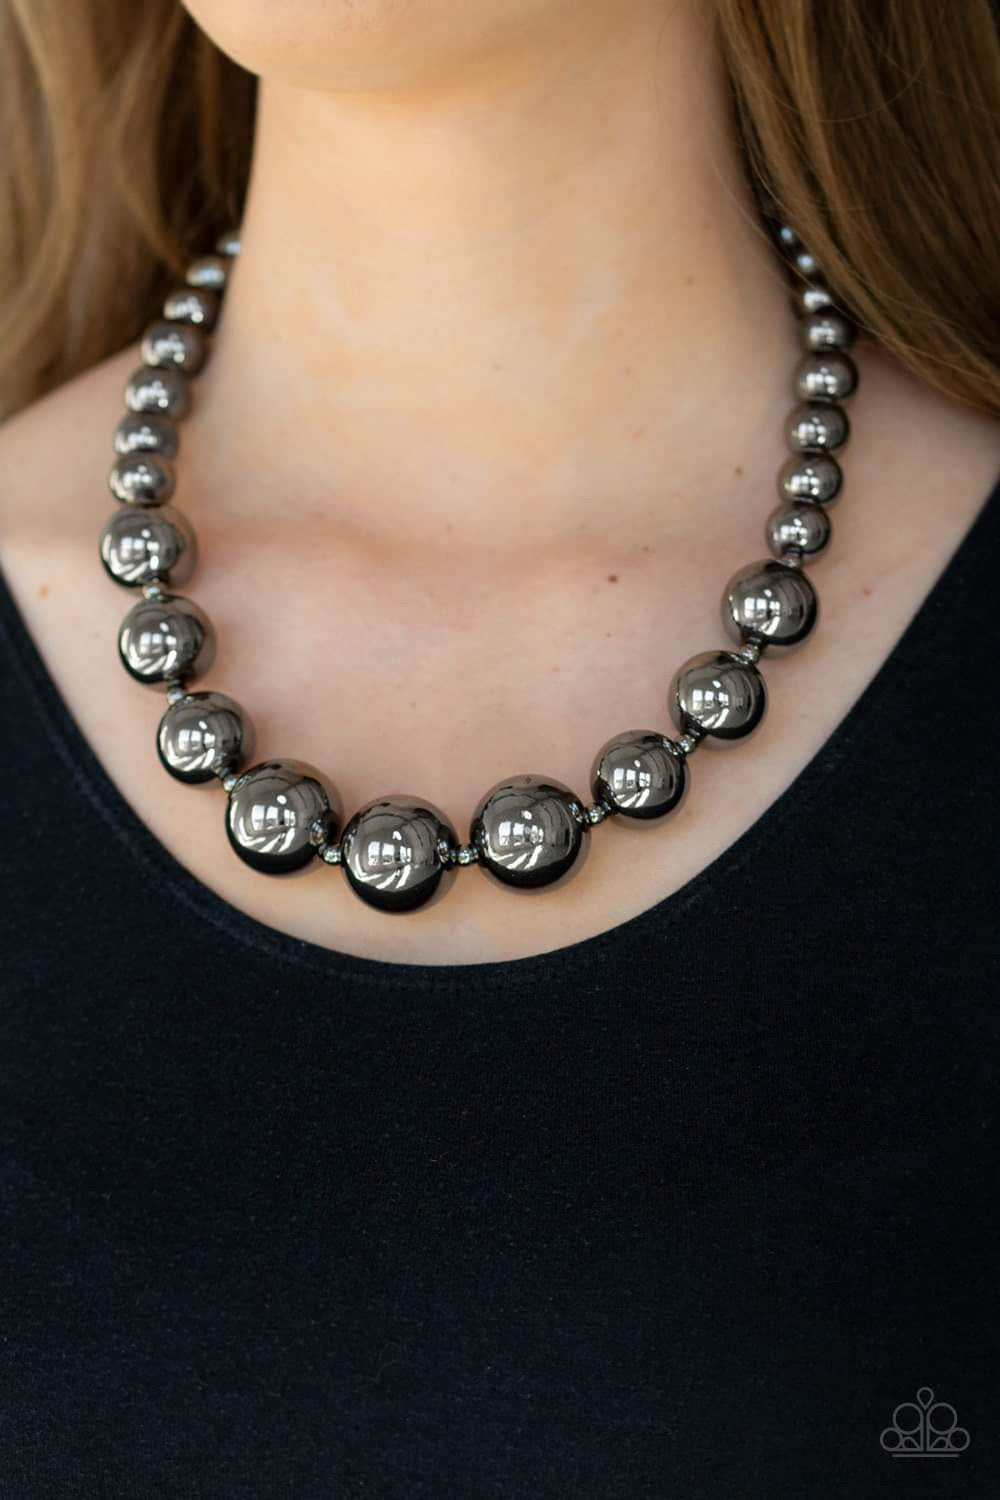 Paparazzi Jewelry Necklace Living Up To Reputation - Black